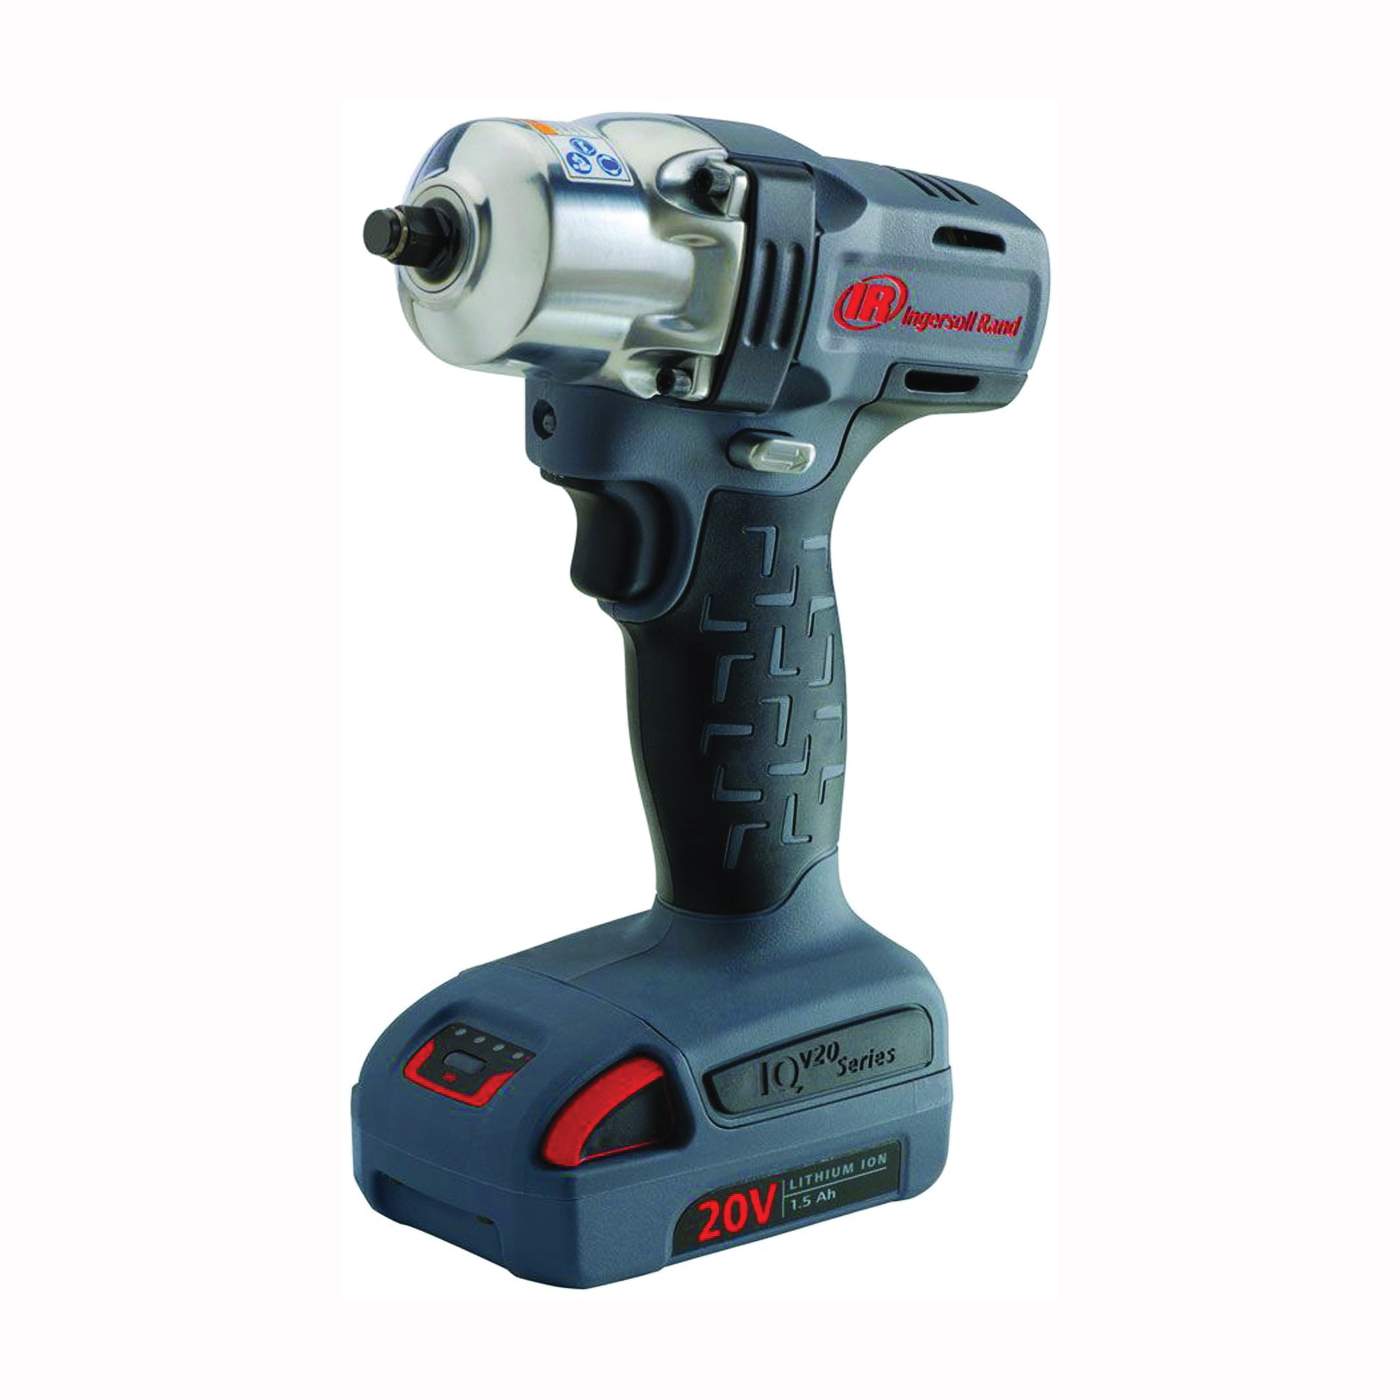 W5130-K12 Impact Wrench Kit, Battery Included, 20 V, 2.5 Ah, 3/8 in Drive, Square Drive